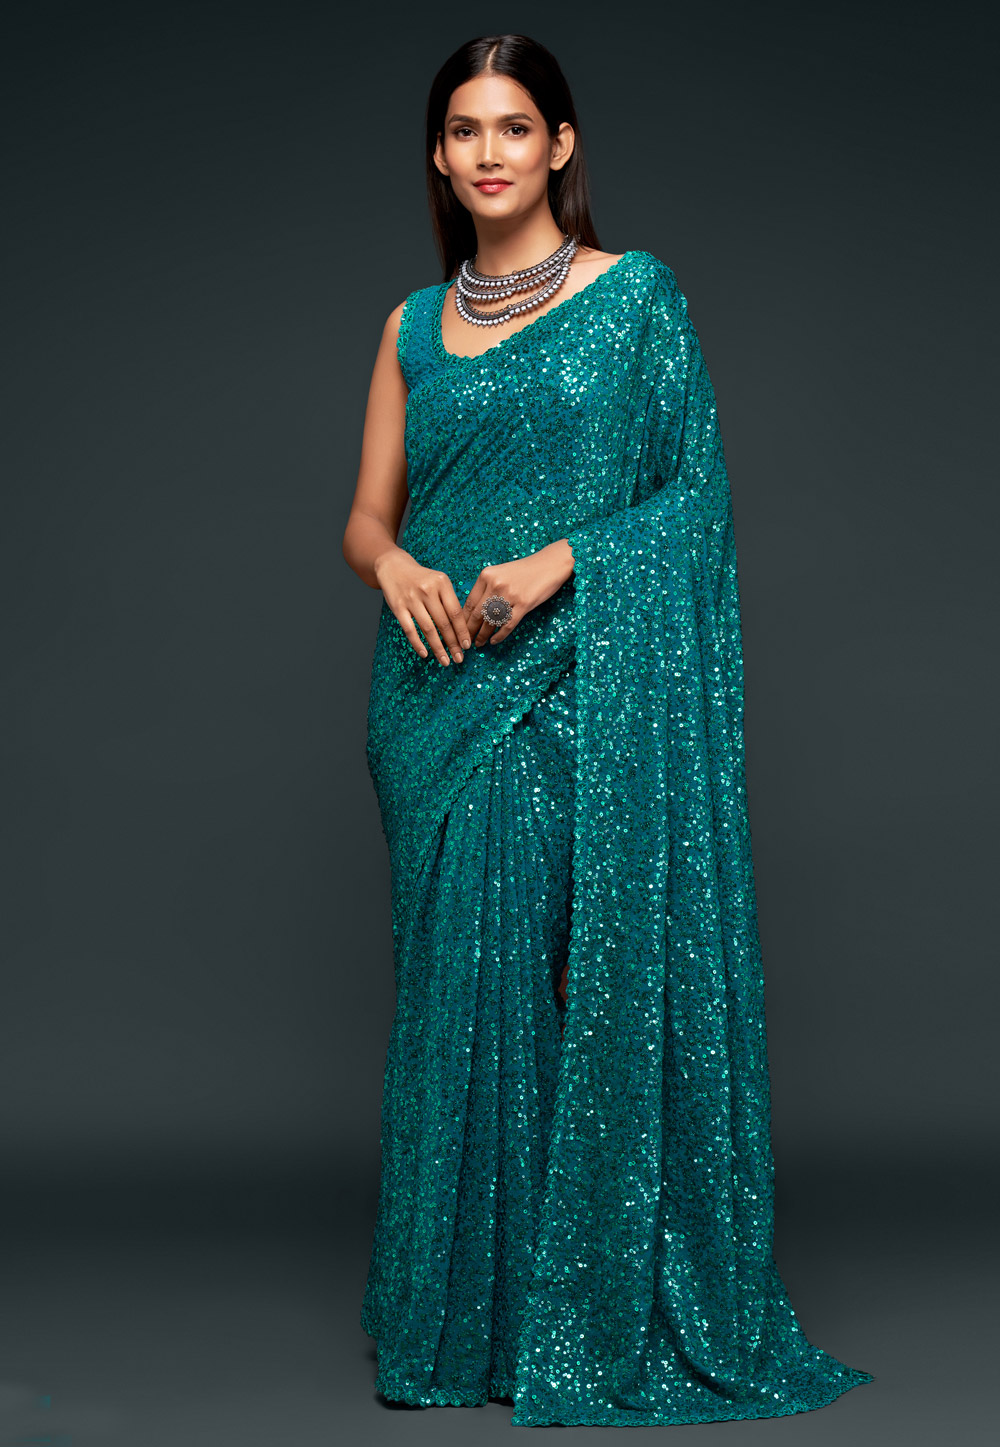 Teal Georgette Saree With Blouse 234297